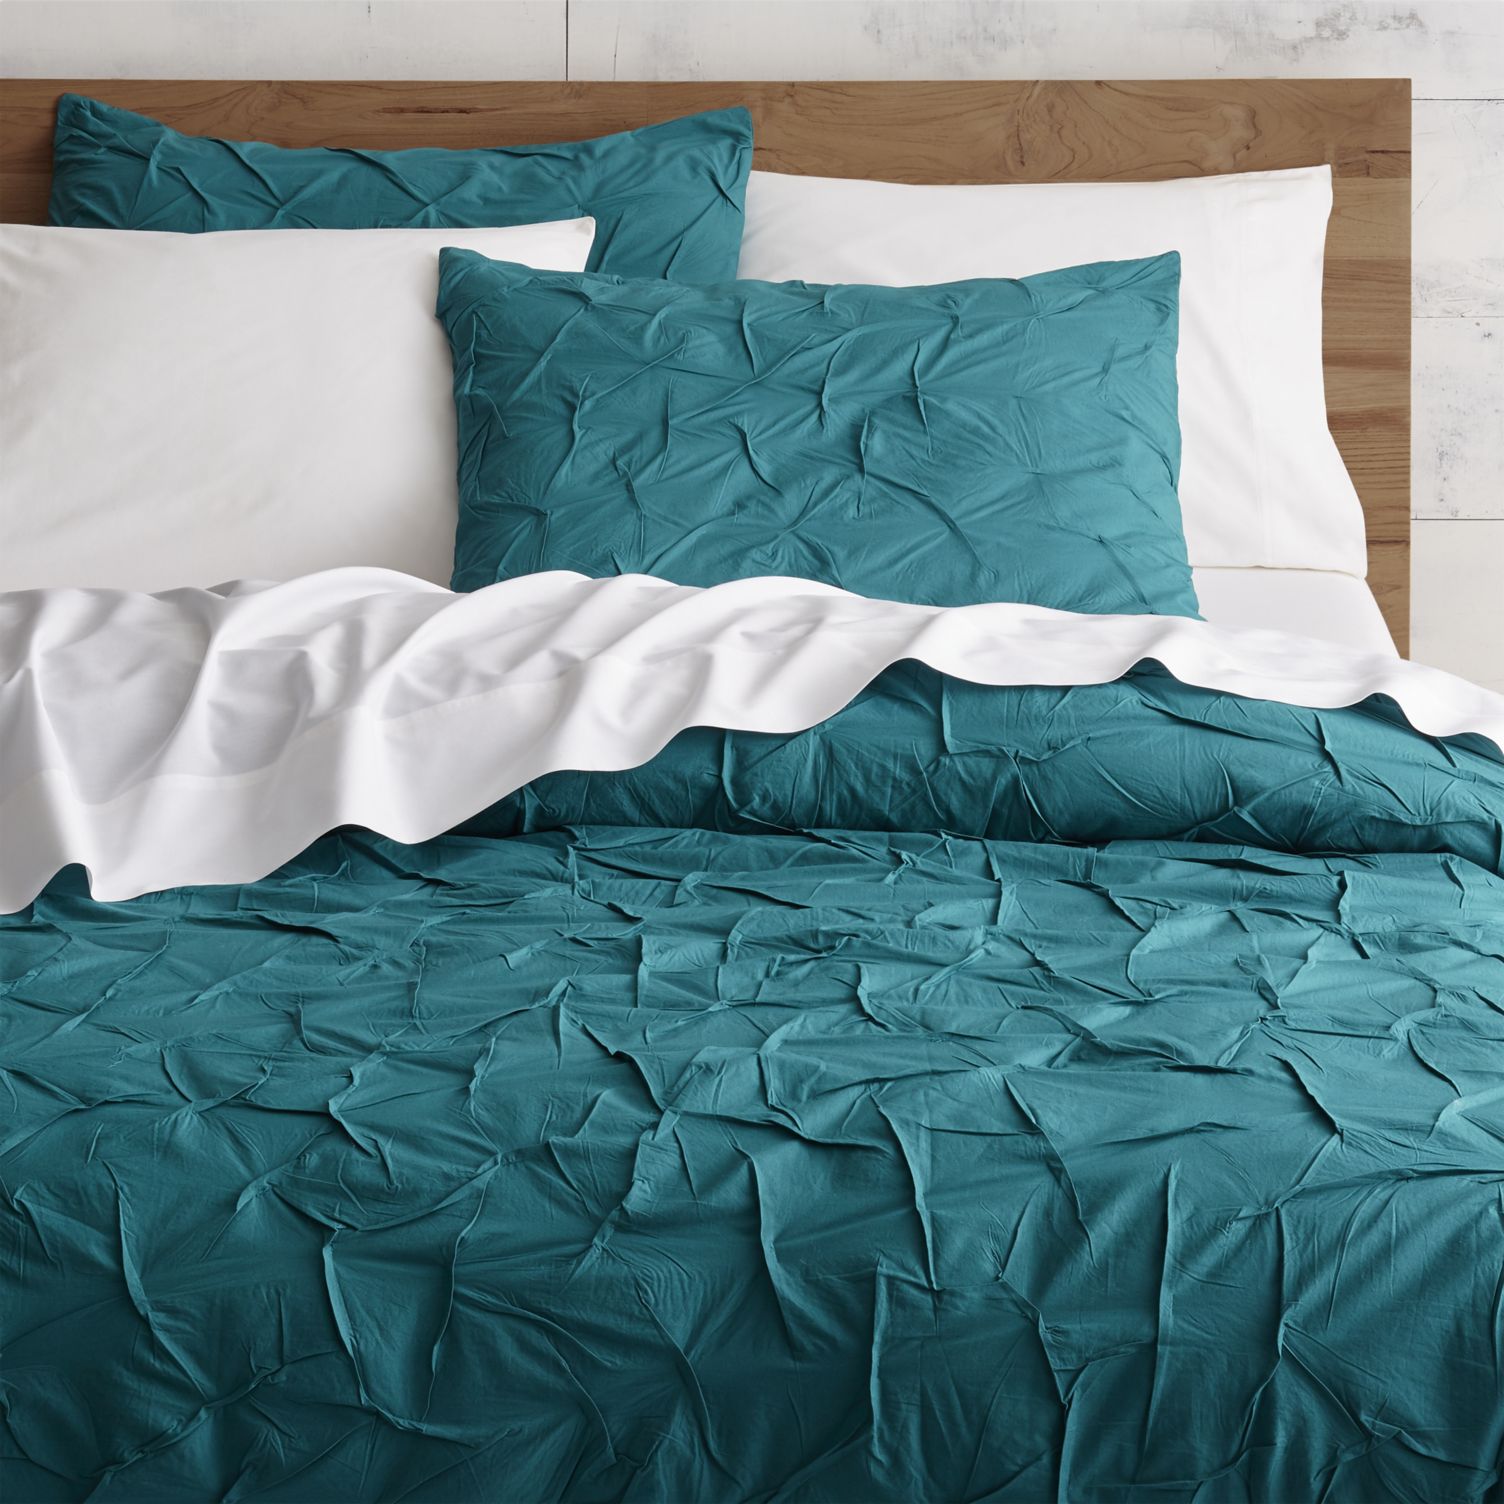 Teal bedding from CB2